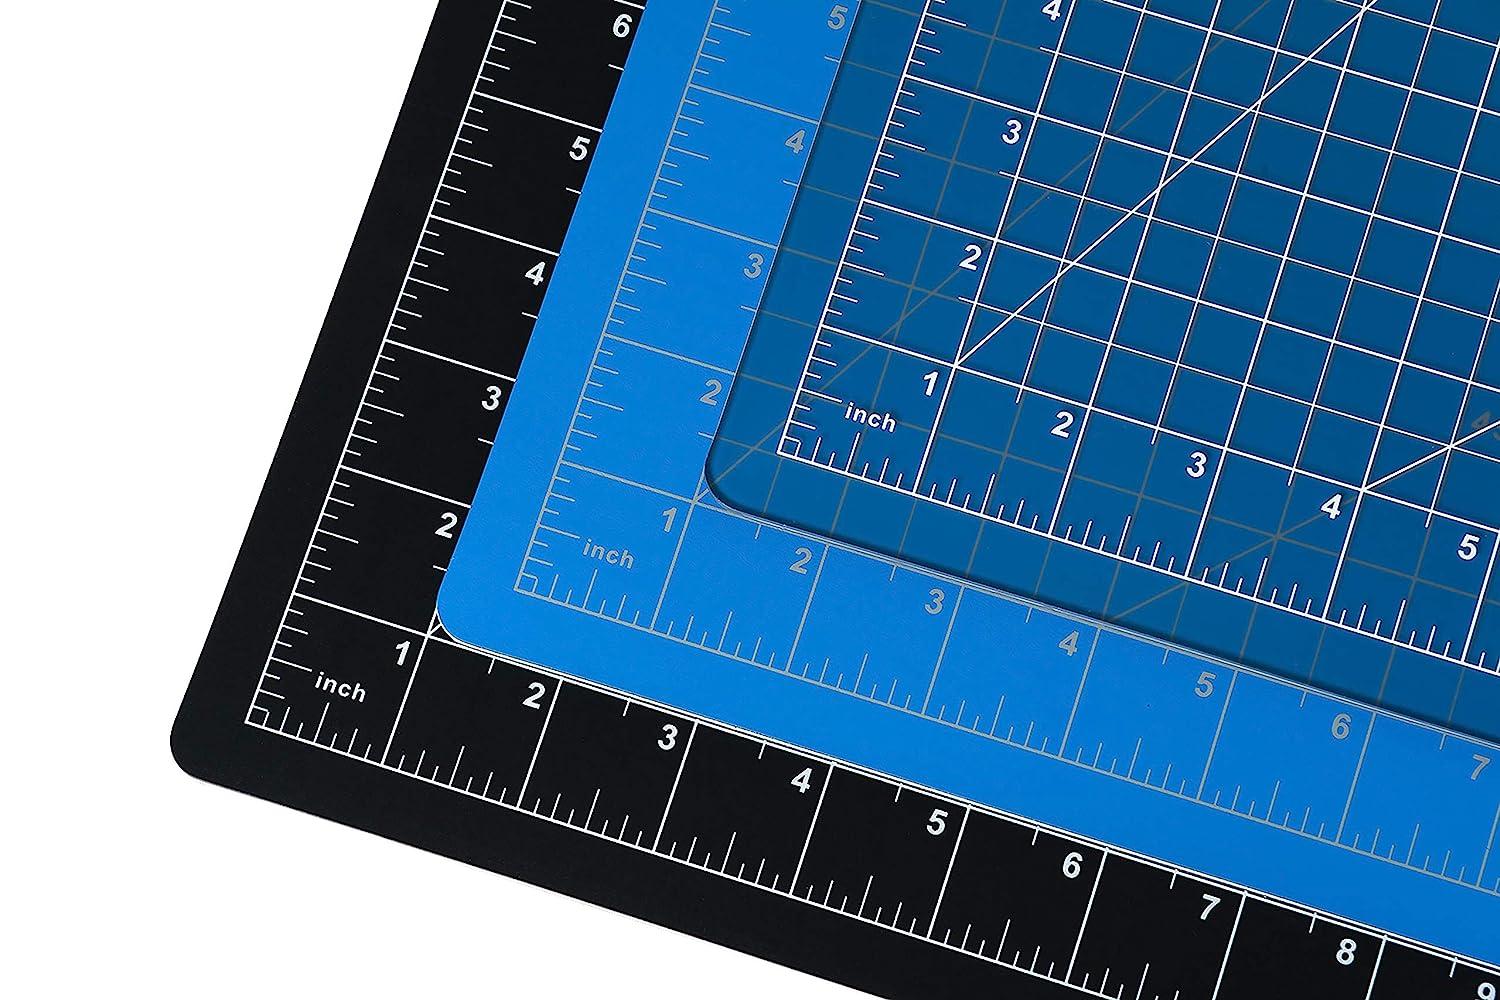 Dahle Vantage 10670 Self-Healing Cutting Mat, 9x12, 1/2 Grid, 5 Layers  for Max Healing, Perfect for Crafts & Sewing, Black